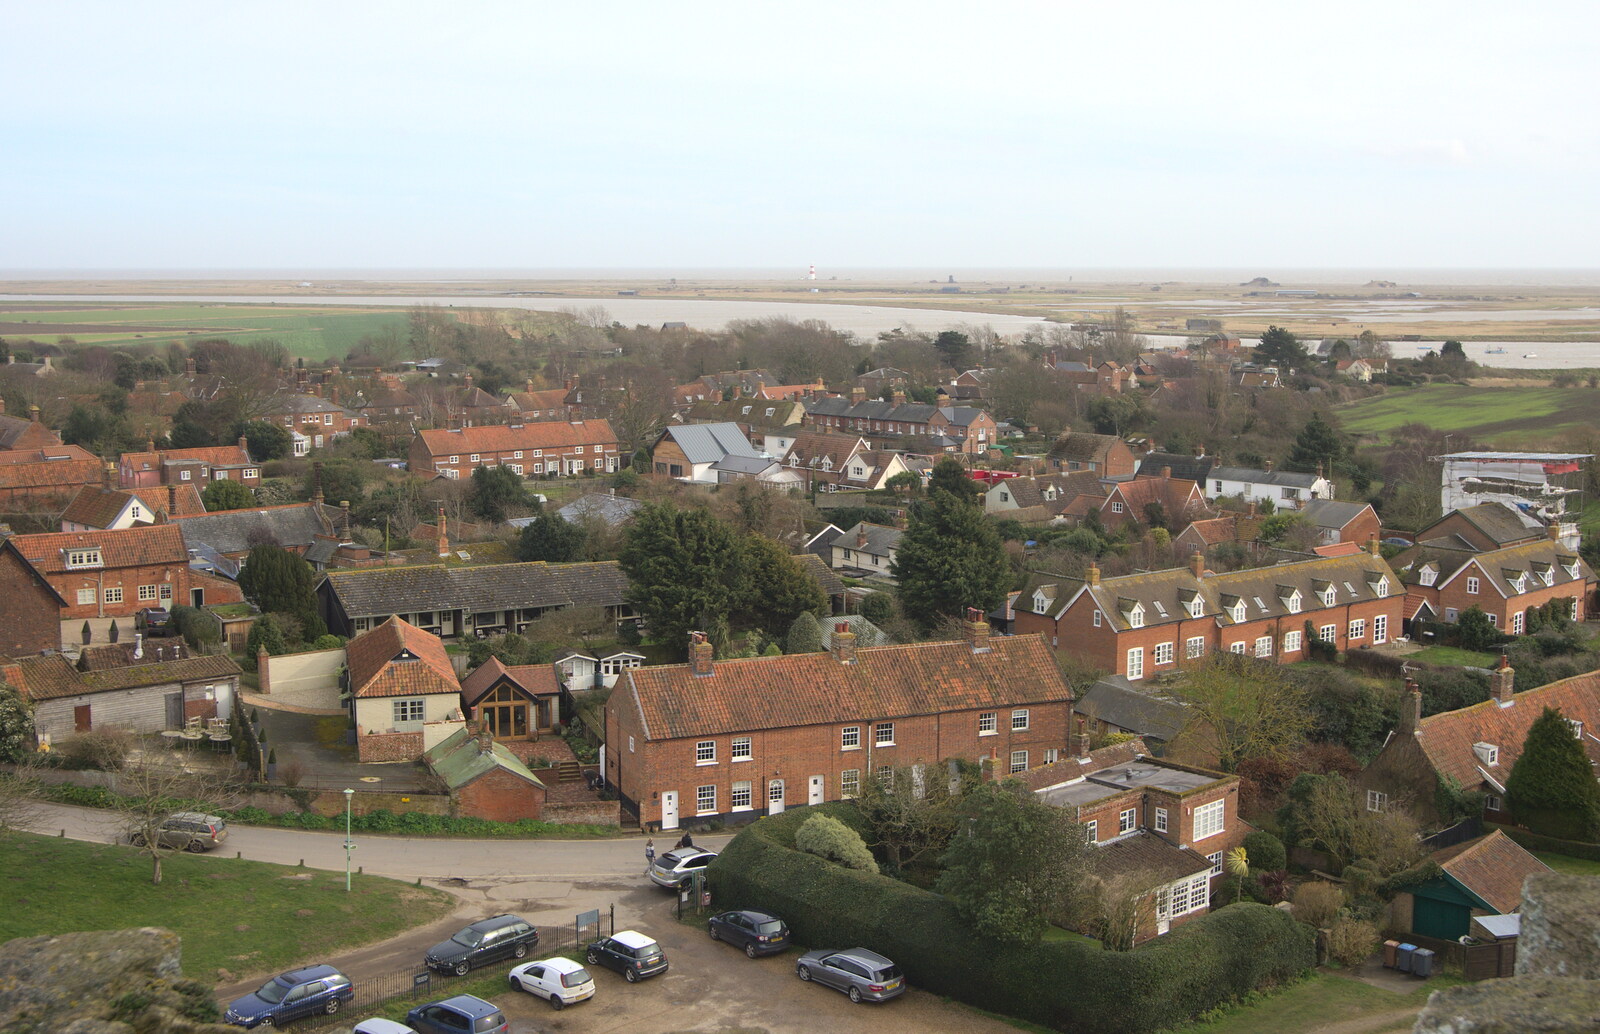 A view over the town towards the Ness from A Trip to Orford Castle, Orford, Suffolk - 2nd March 2014